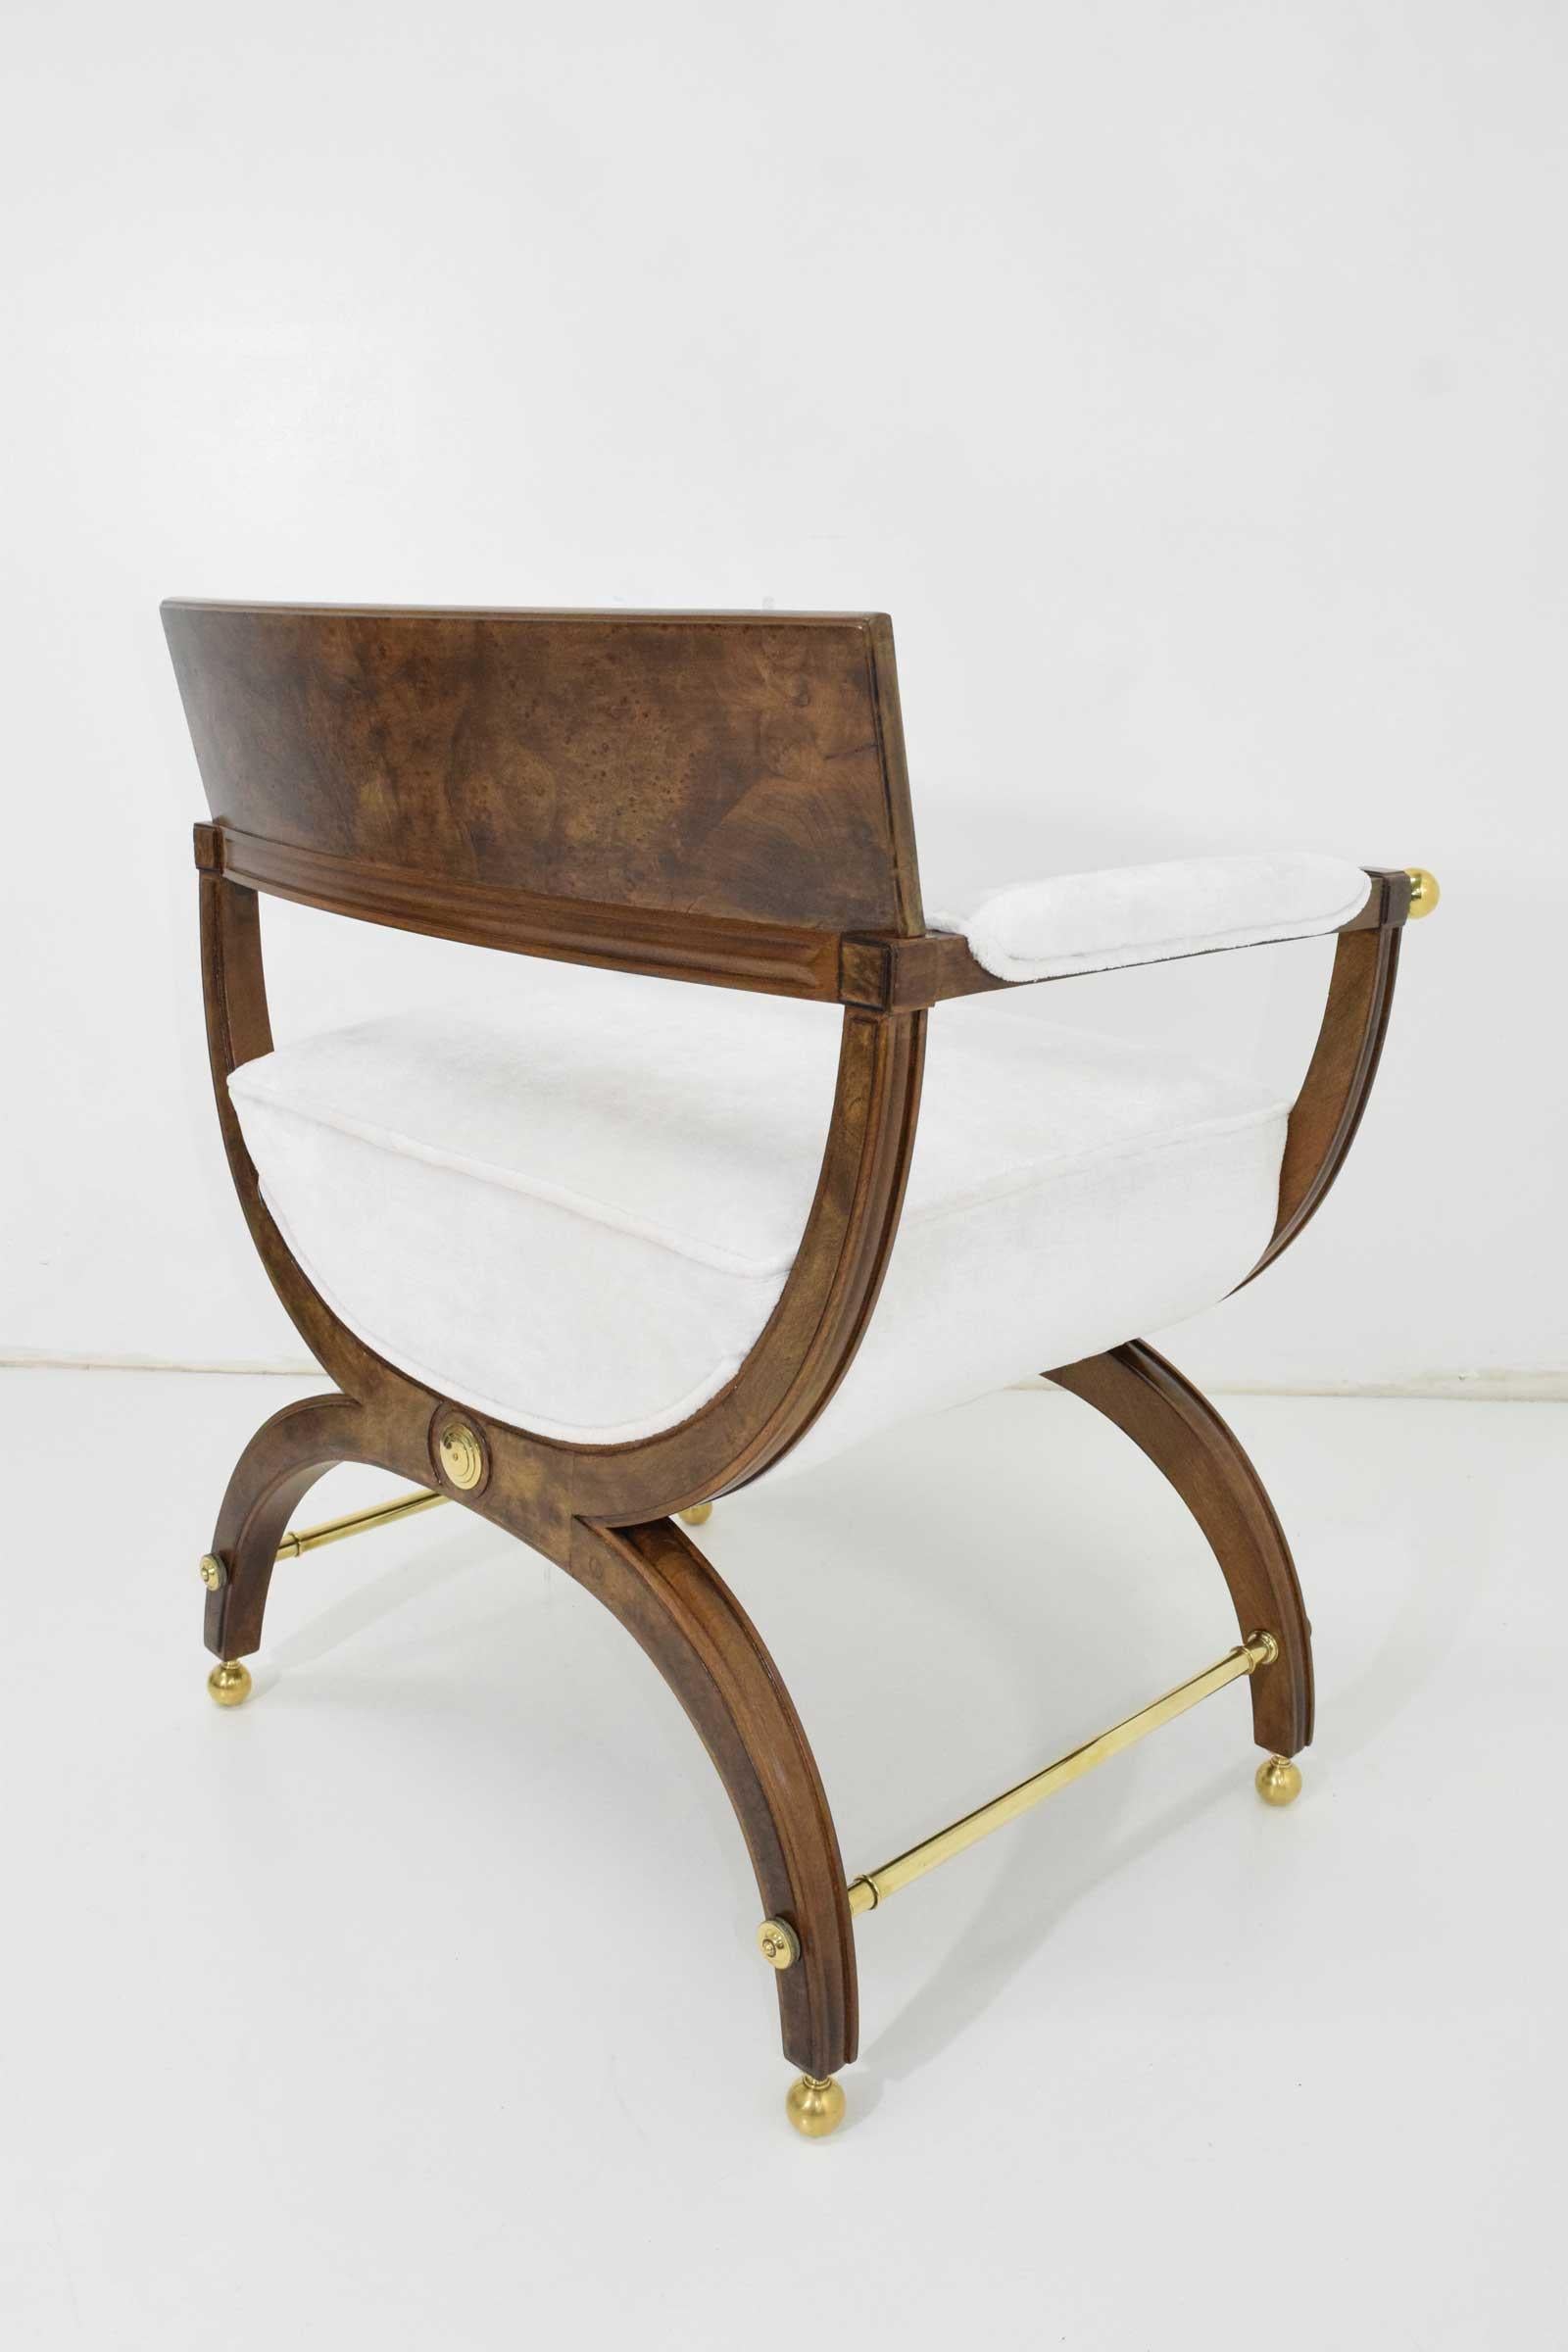 20th Century Director or Savonarola Style Chairs in Burl Wood with Brass Accents by Widdicomb